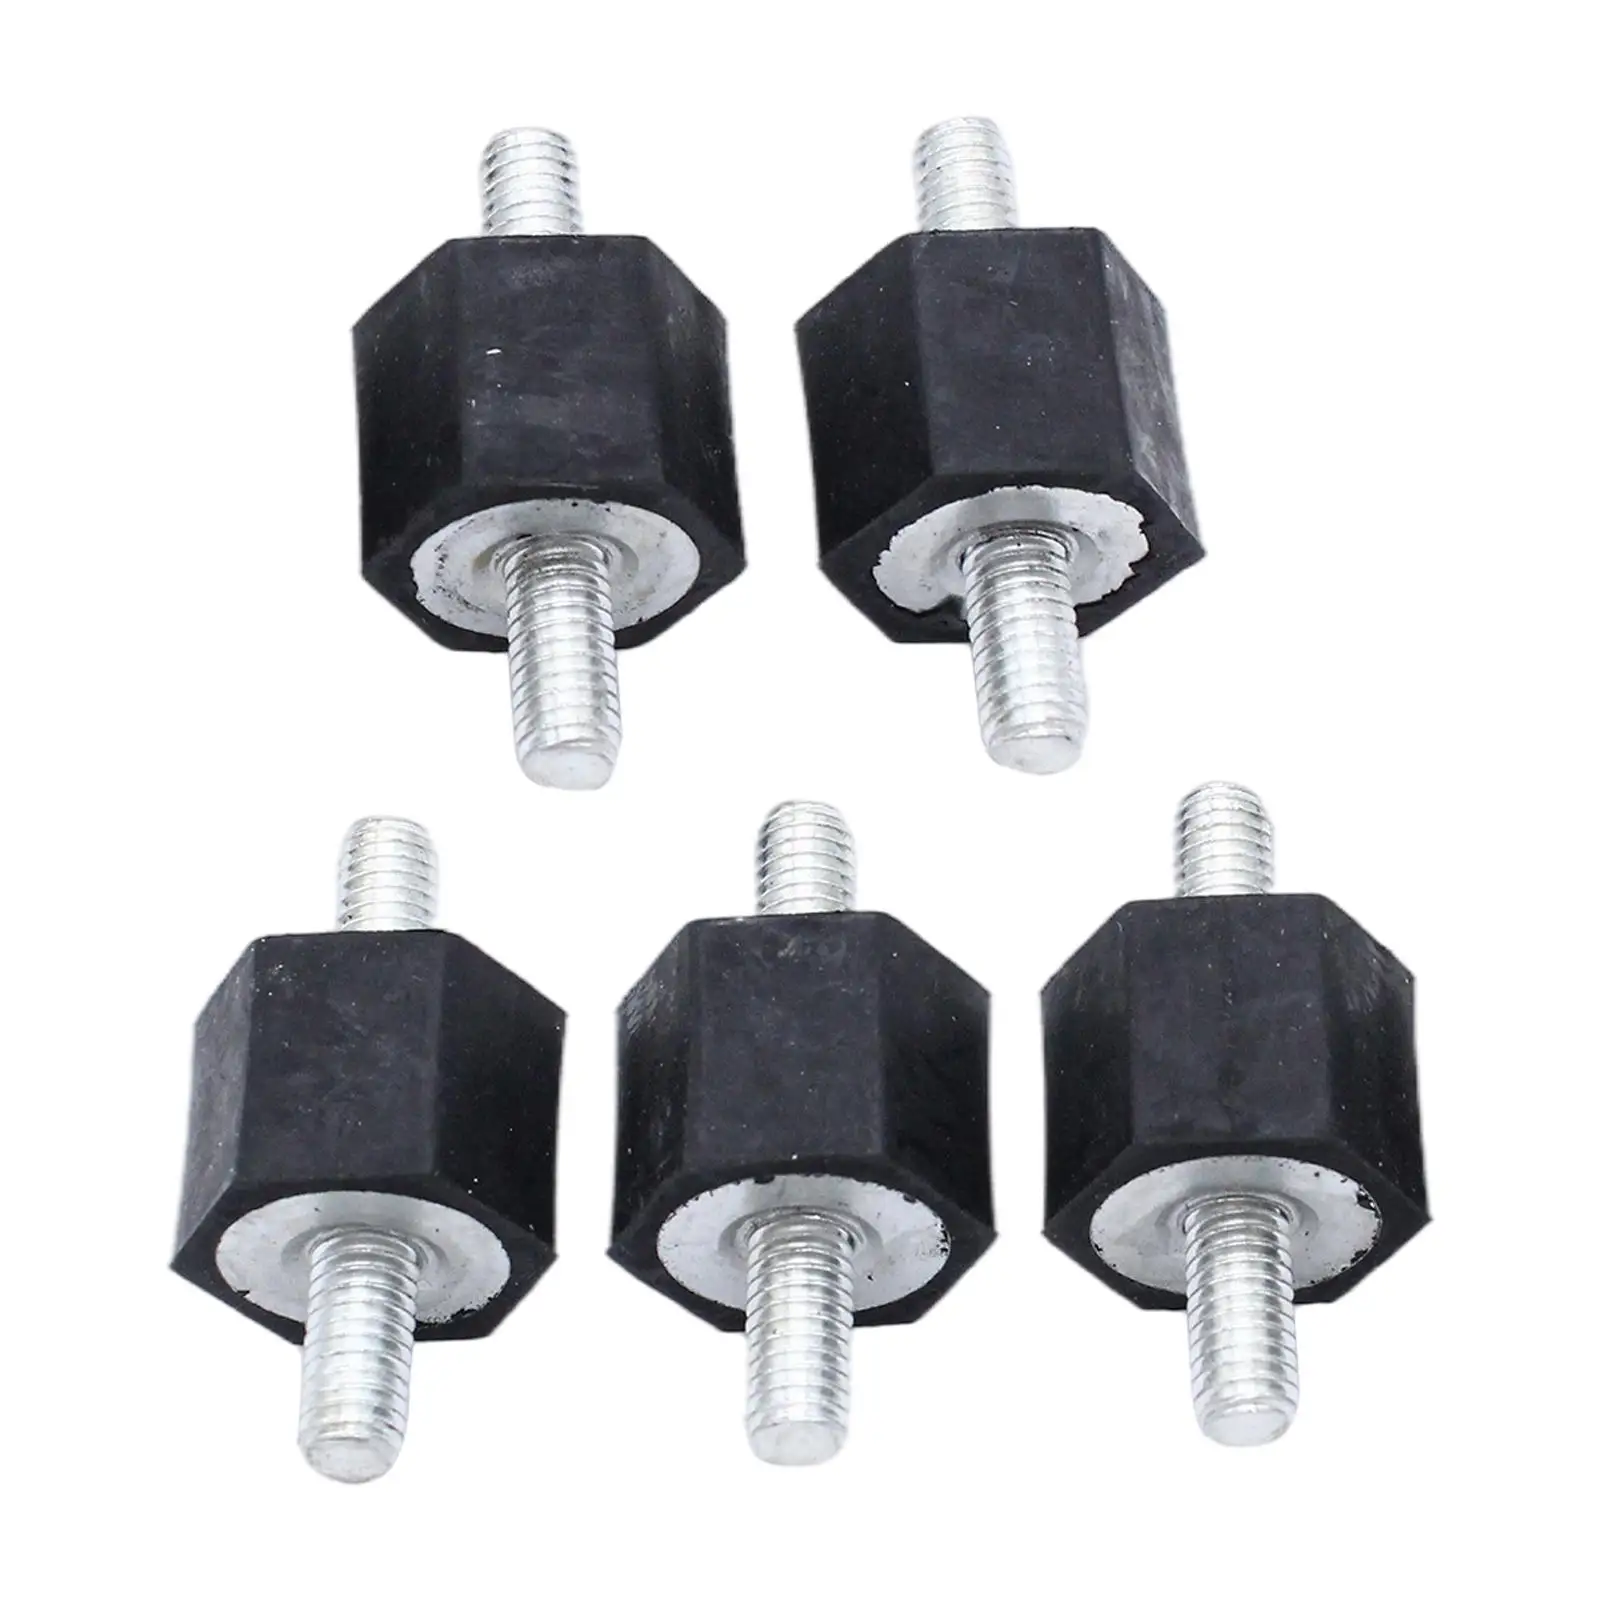 5Pcs Rubber Mounts Shock Absorbers Anti Vibration for Golf MK2 Cover Mounting for MK3 Front Mount Intercoolers Oil Coolers